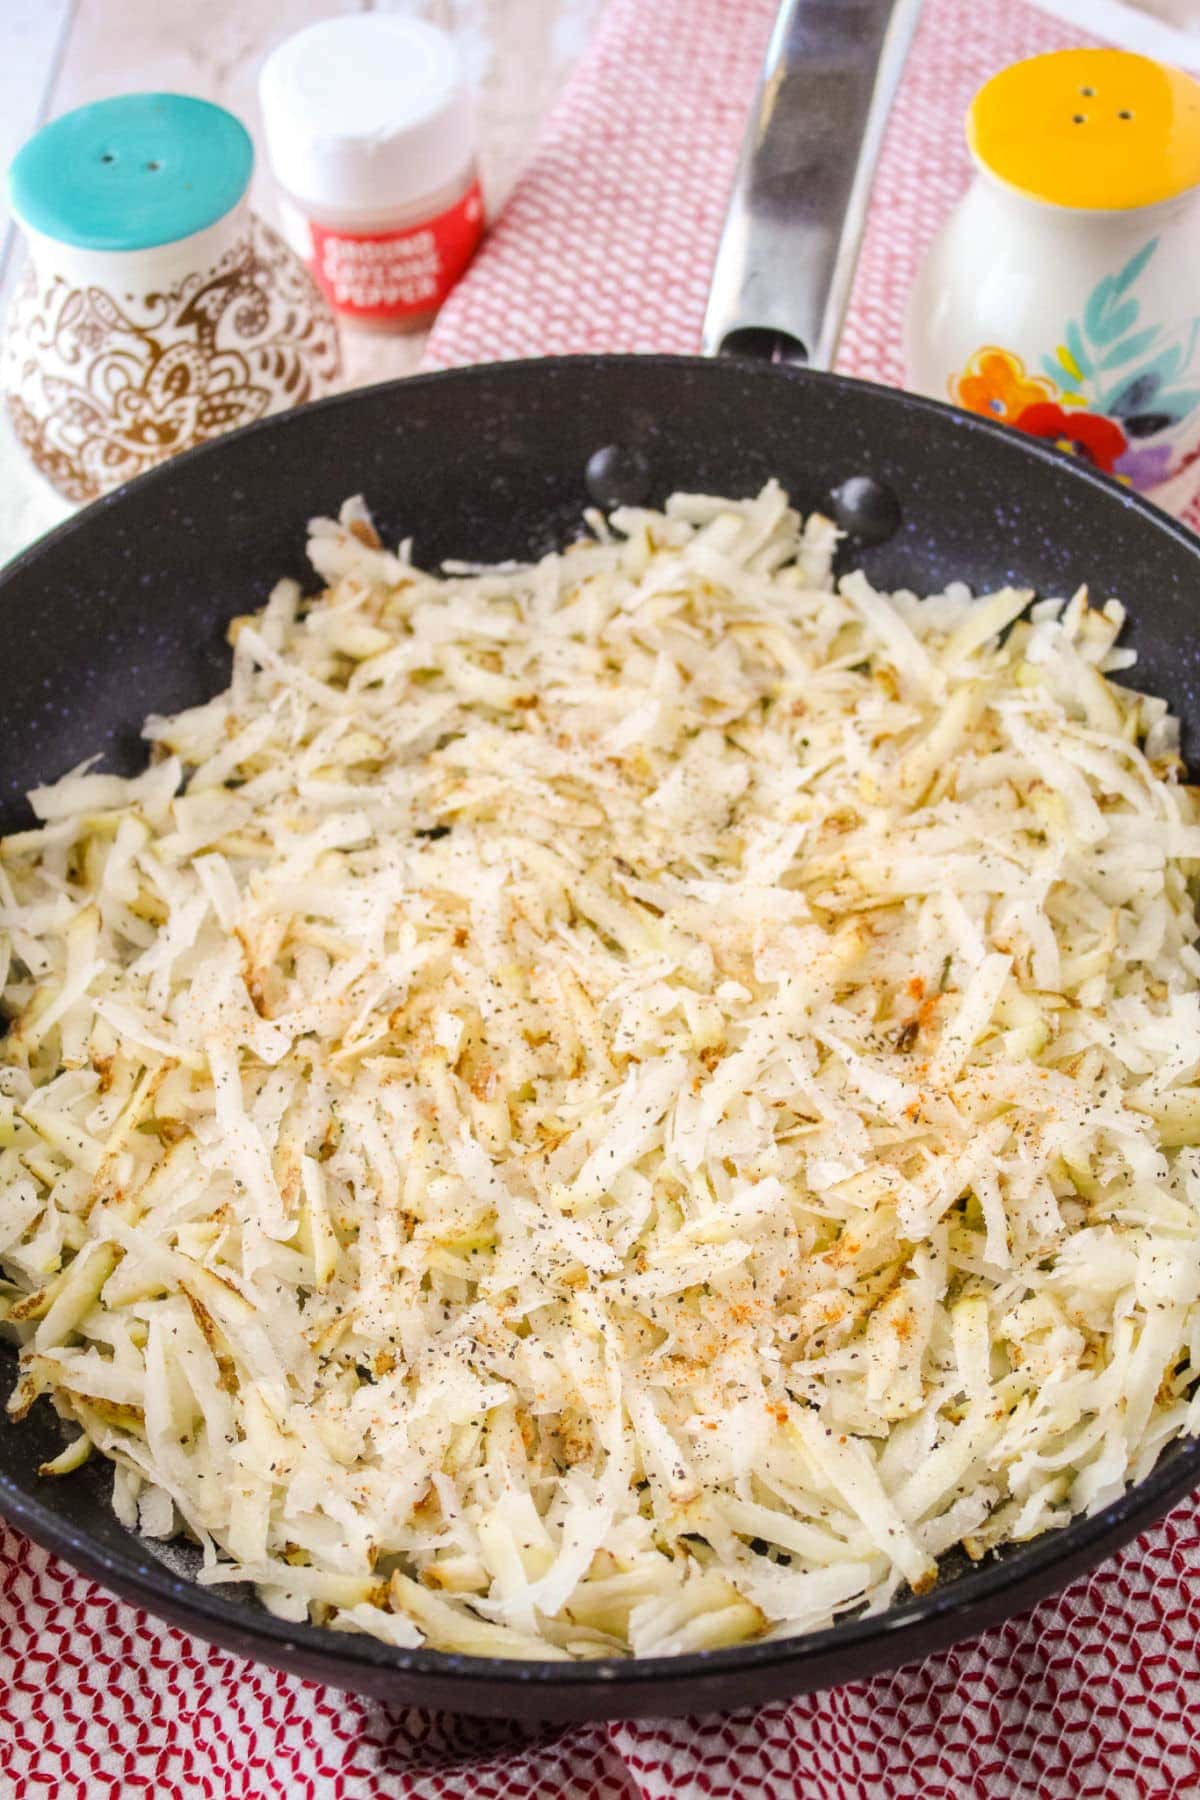 shredded potatoes in a skillet with salt, pepper, and cayenne